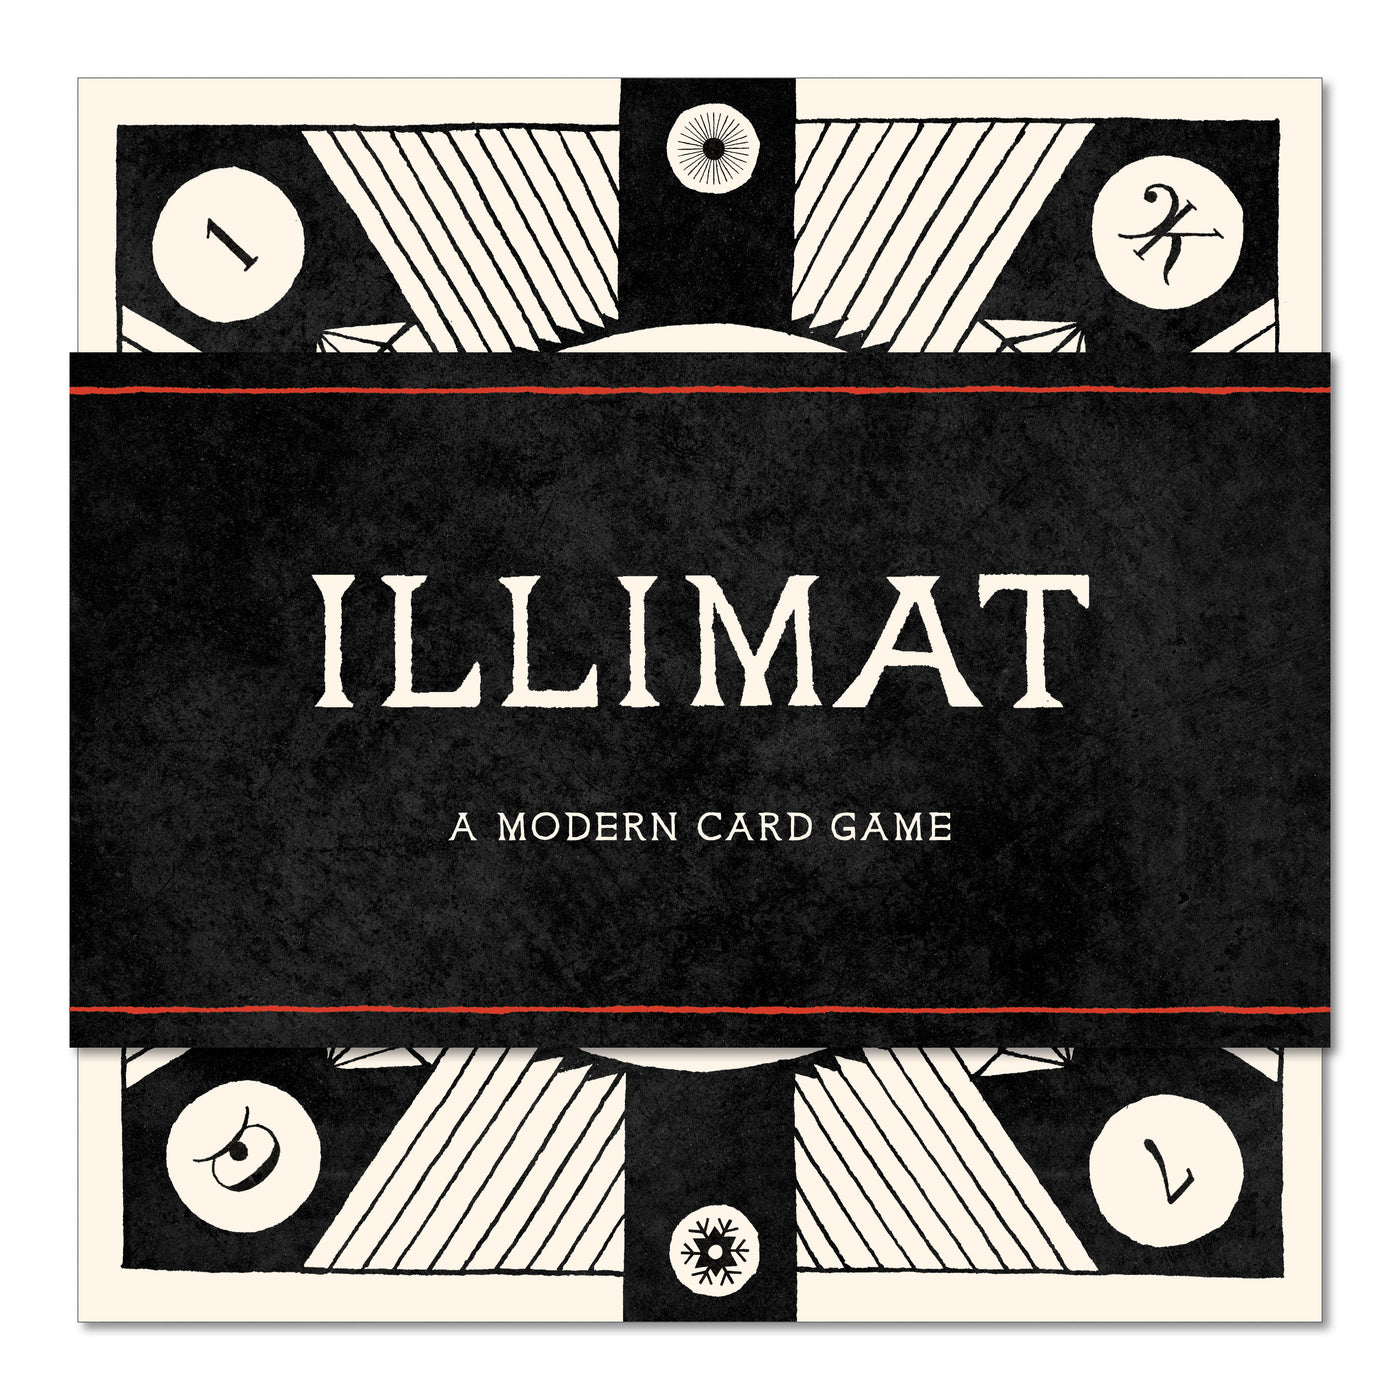 The front of the Illimat box, which is white with black thin stripes 